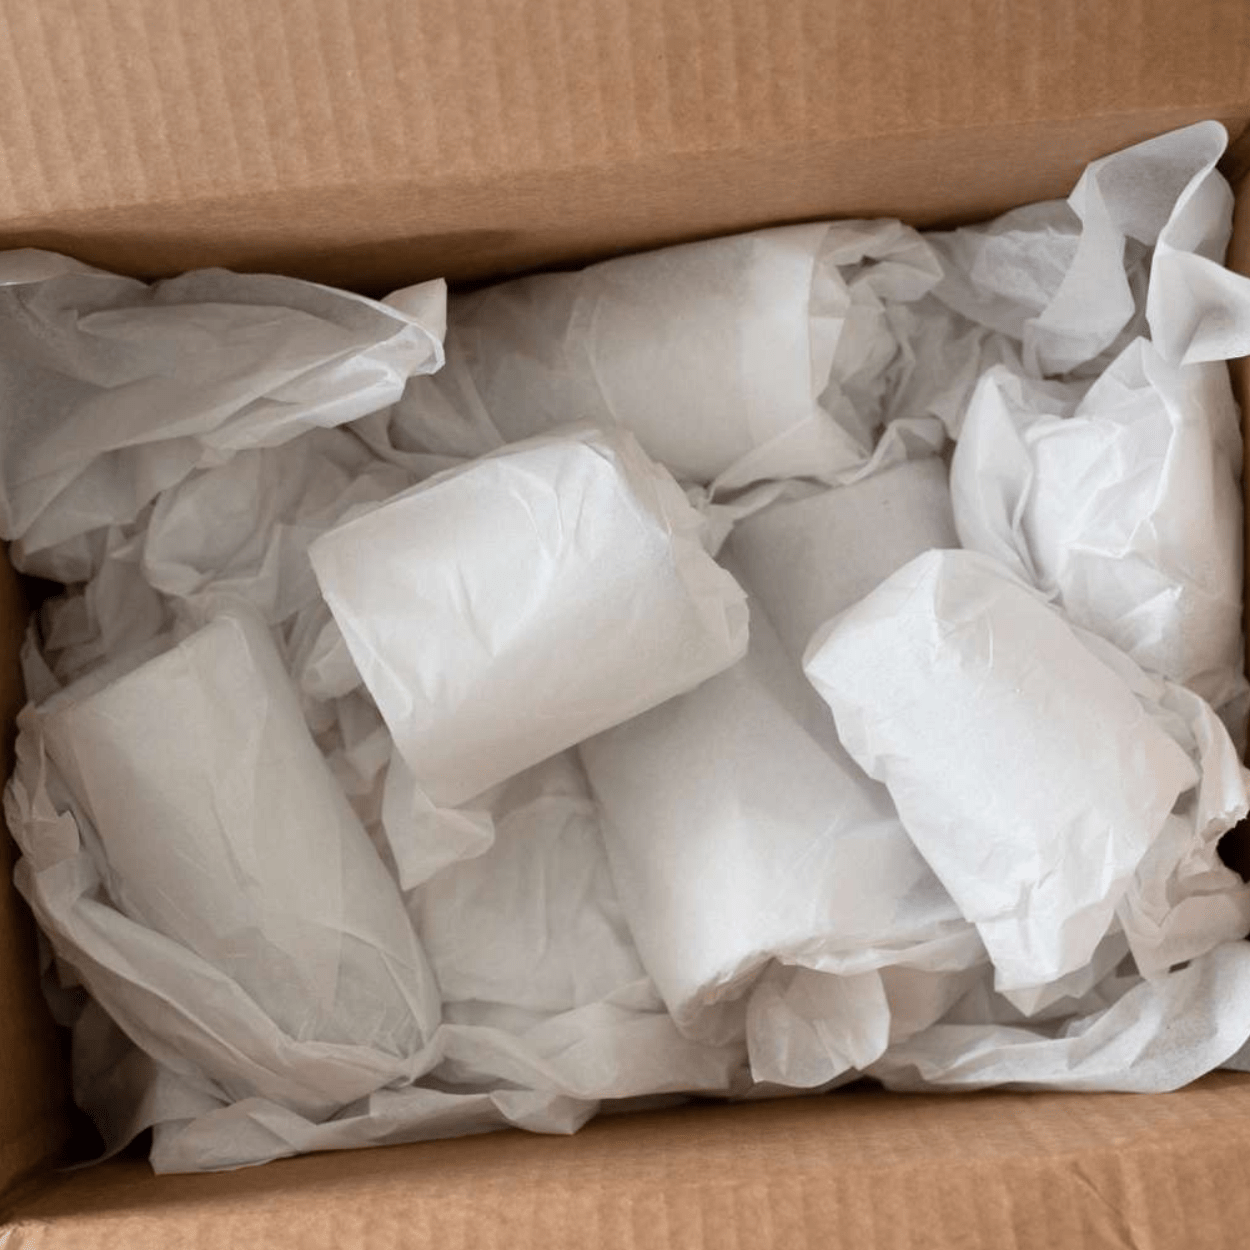 20 x 30 Gift Grade Tissue Paper Sheets Bulk Package - White (10 lb.) -  GBE Packaging Supplies - Wholesale Packaging, Boxes, Mailers, Bubble, Poly  Bags - Product Packaging Supplies